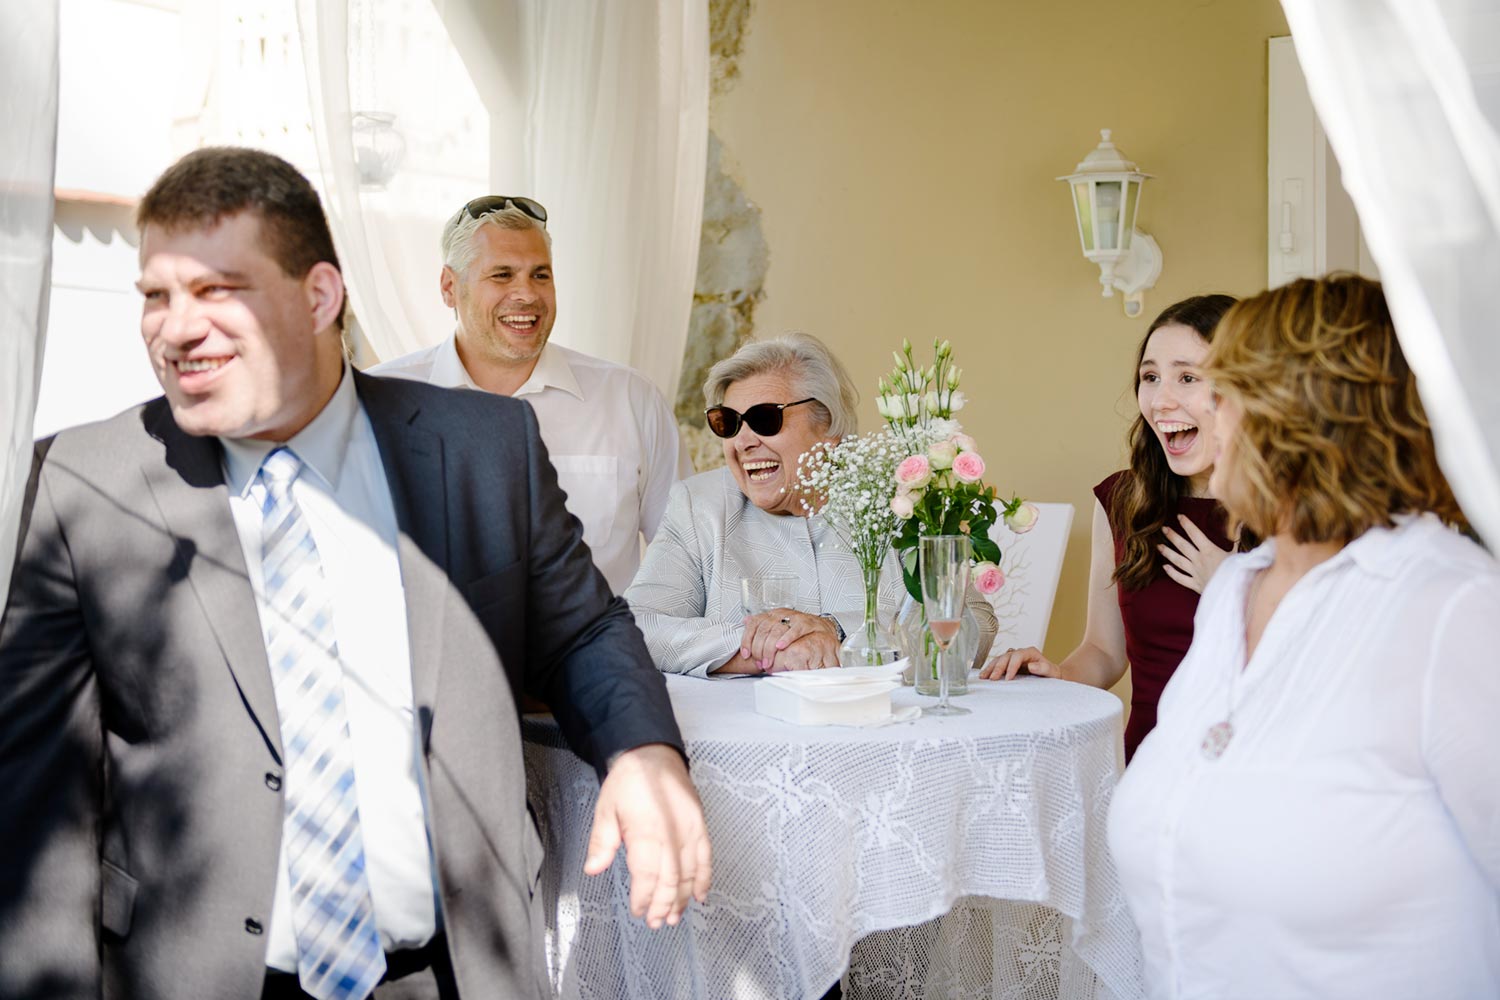 people laughing at the table with white tablecloth and flowers